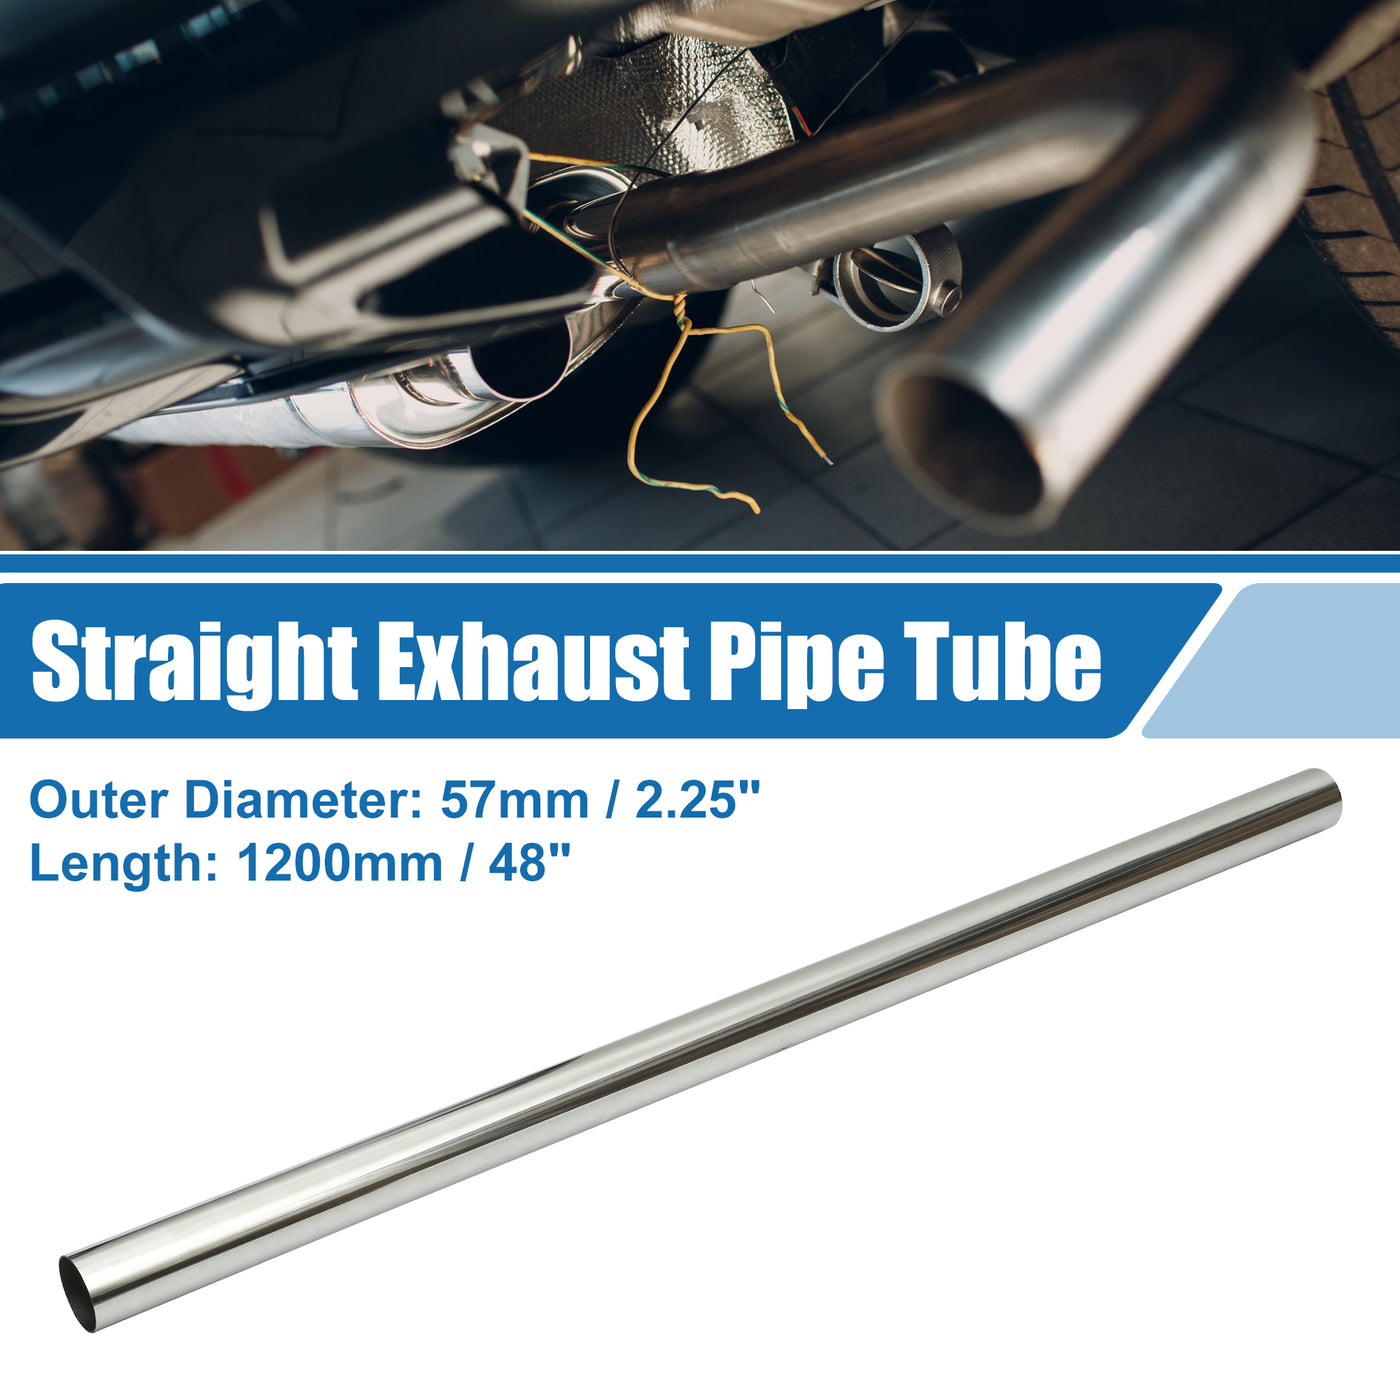 A ABSOPRO Car Mandrel Exhaust Pipe Tube Durable 48" Length 2.25'' OD Straight Exhaust Tube DIY Custom 0 Degree Modified Piping T304 Stainless Steel Silver Tone